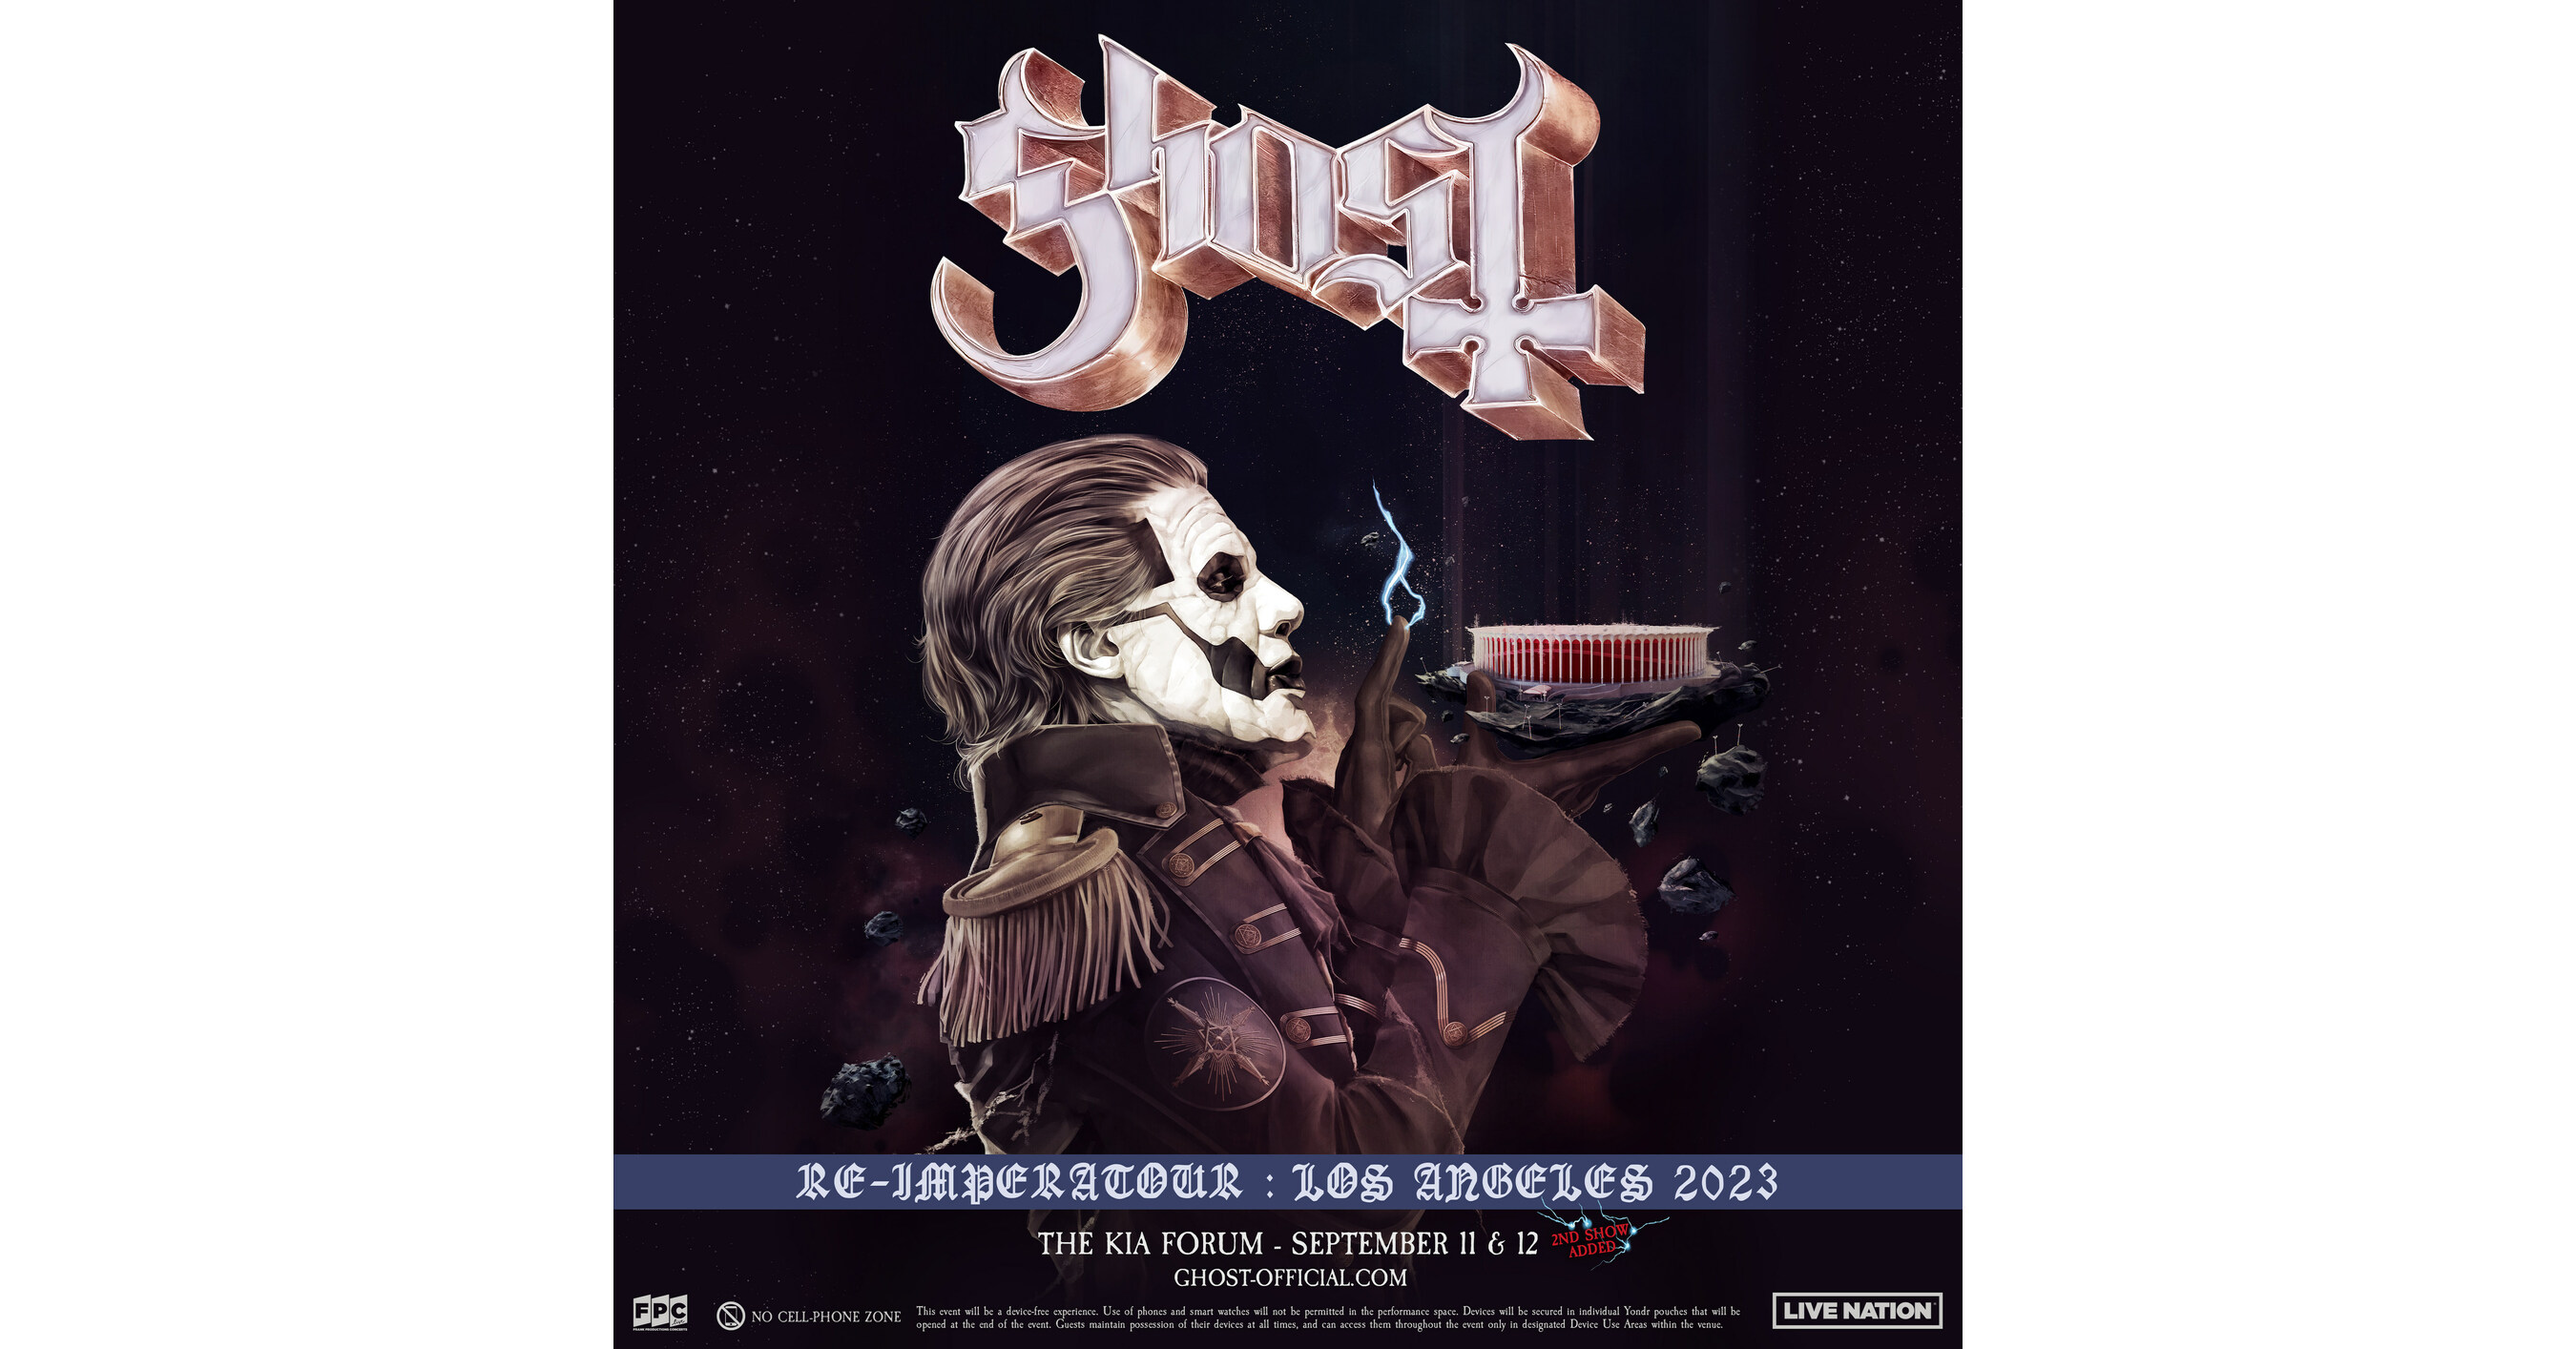 GHOST ADDS SECOND LA DATE ON REIMPERATOUR U.S.A. 2023 DUE TO